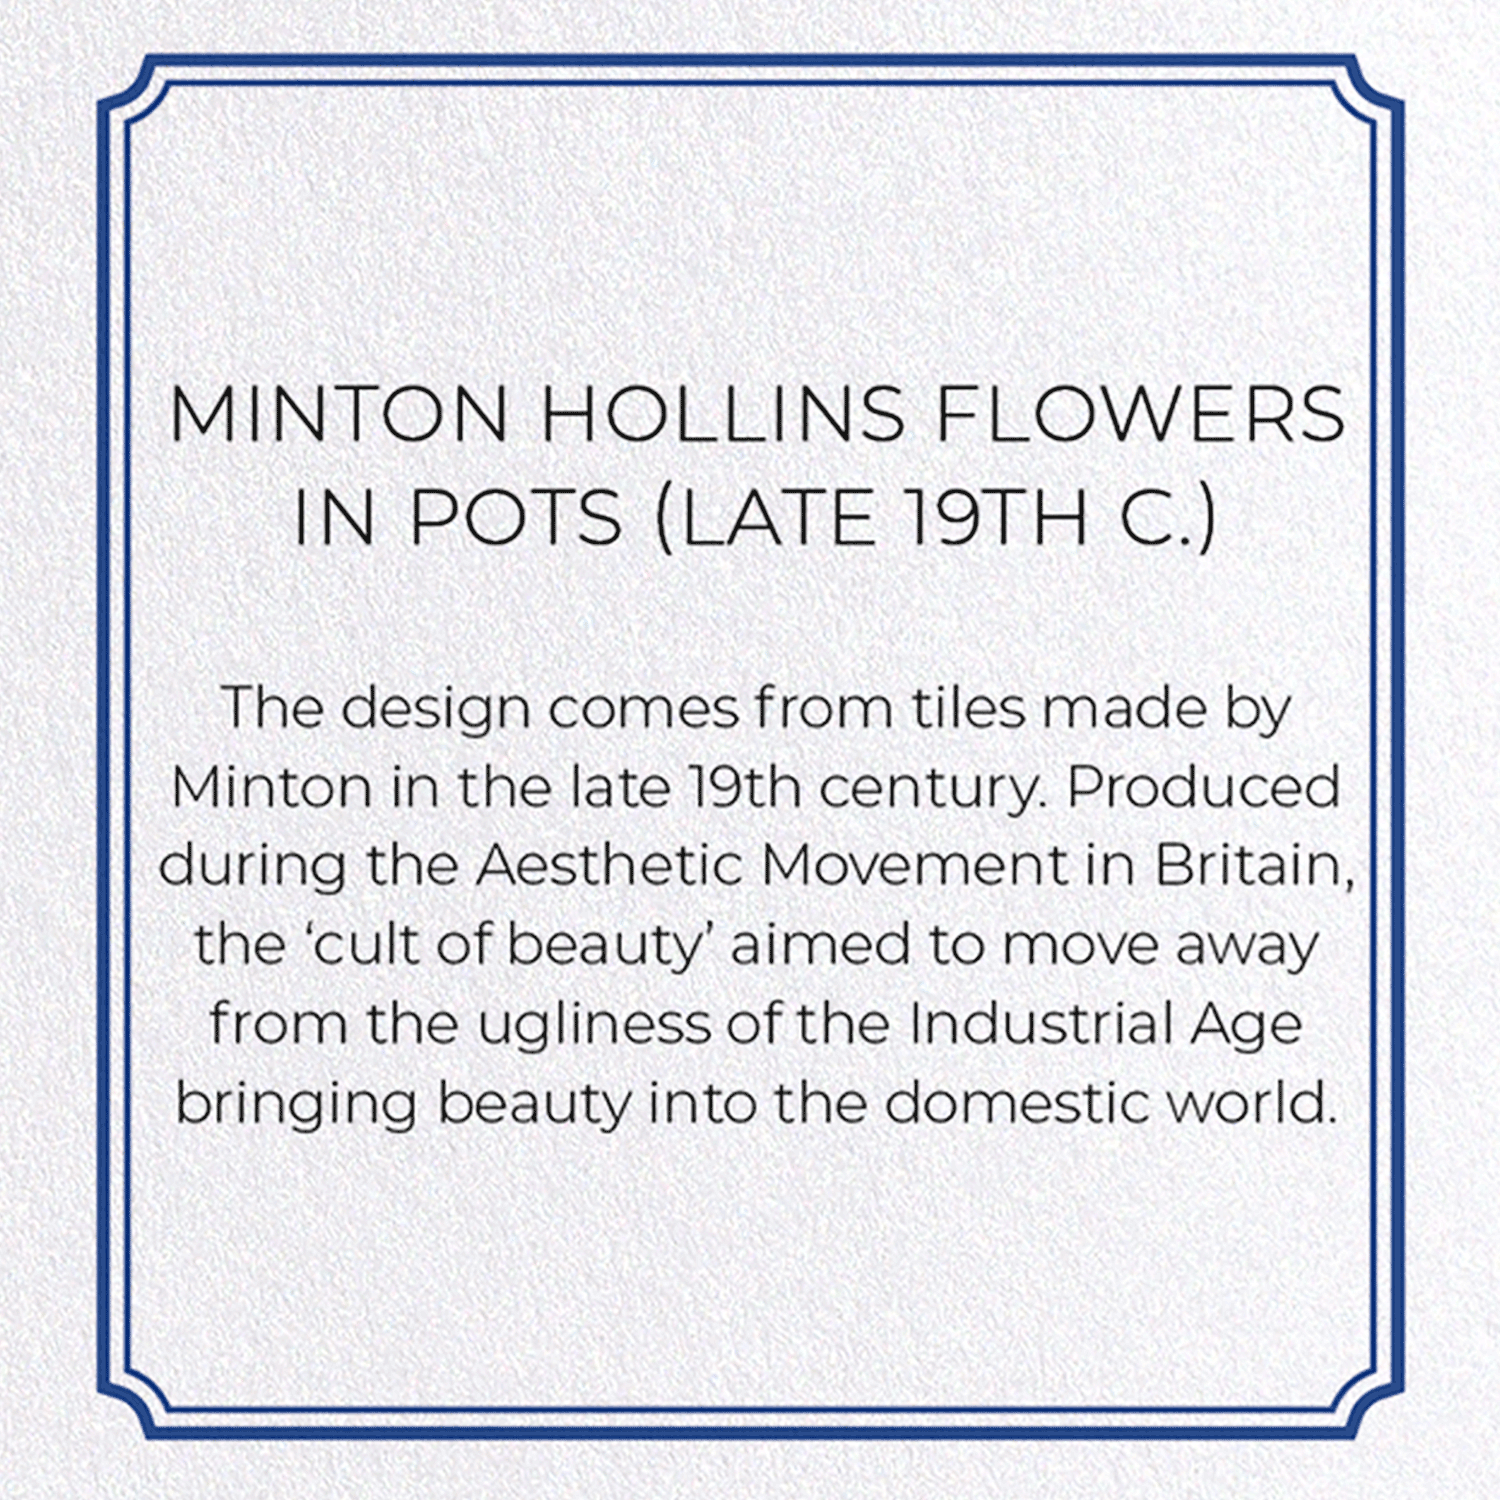 MINTON HOLLINS FLOWERS IN POTS (LATE 19TH C.)